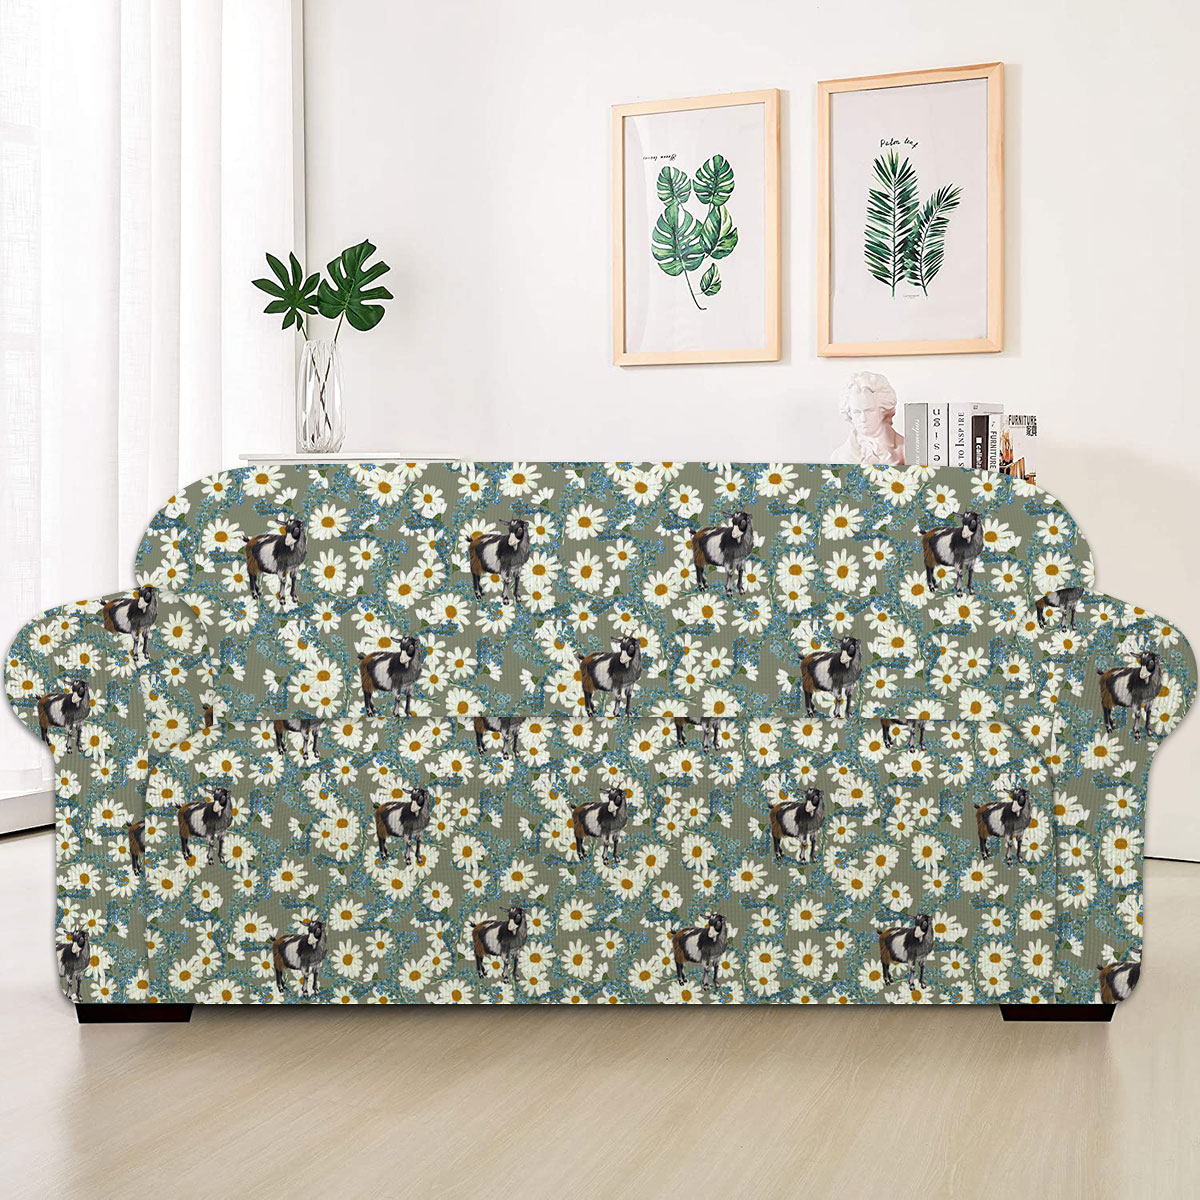 Goat Camomilles Flower Grey Pattern Sofa Cover